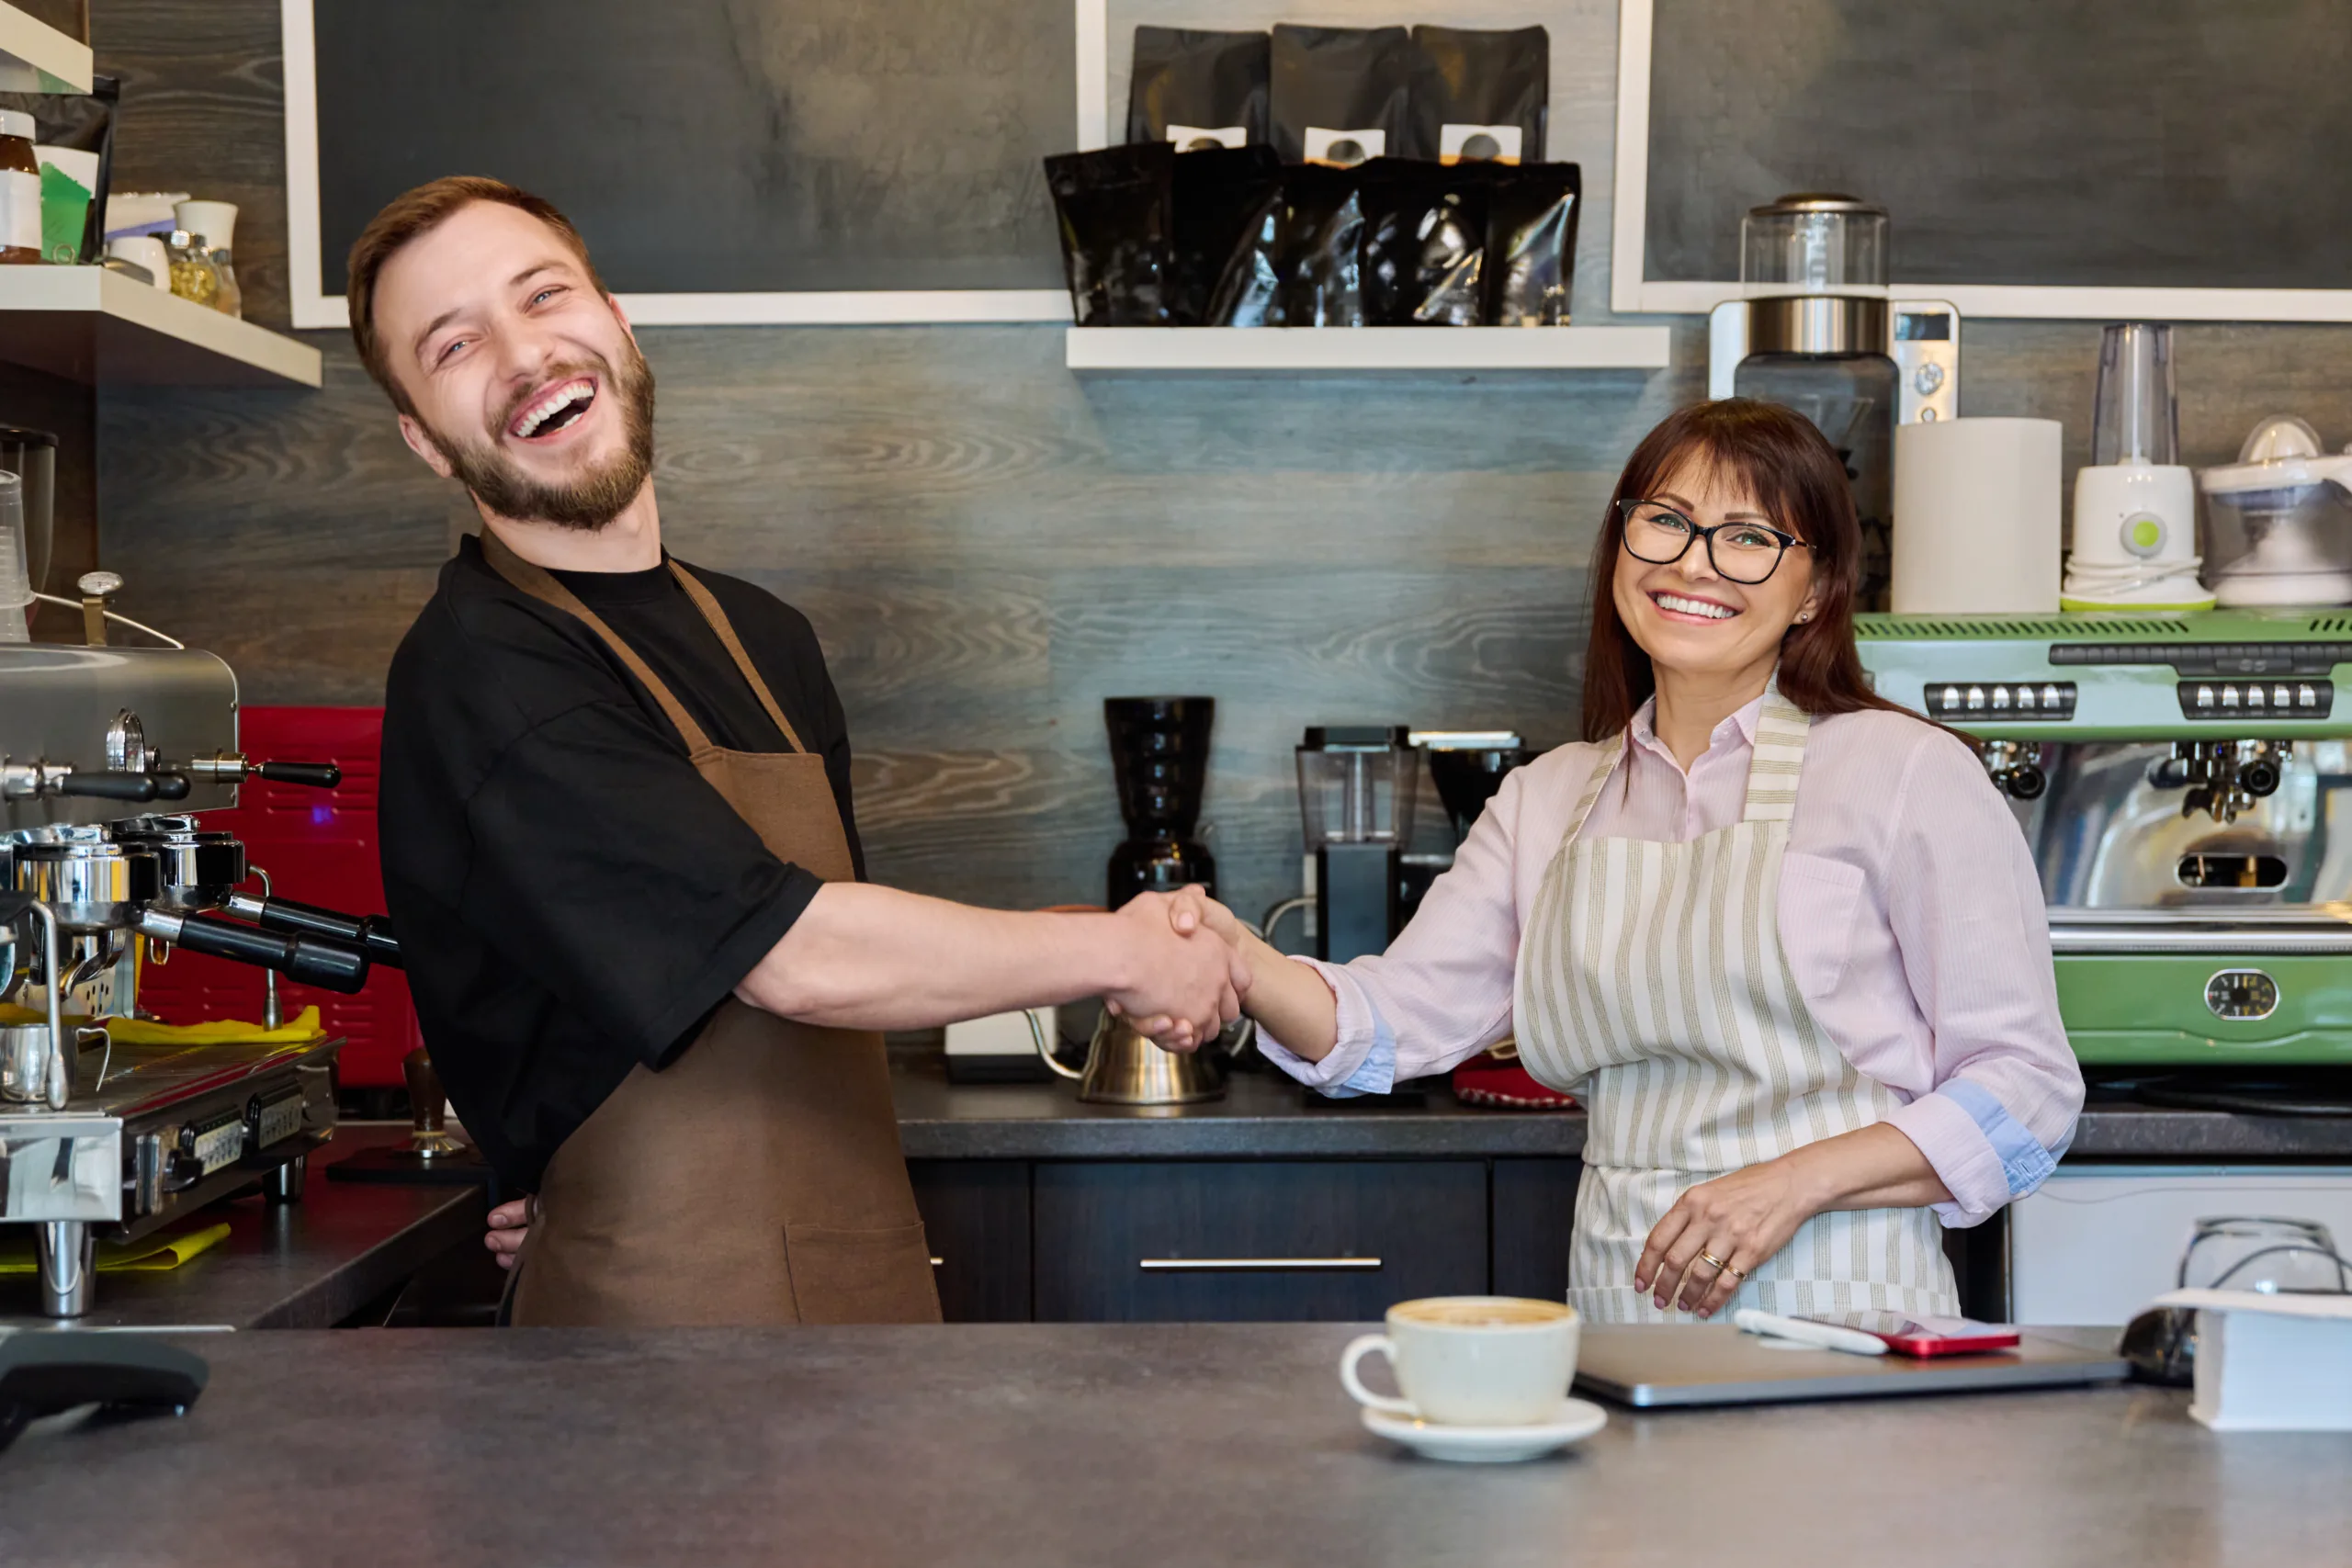 Colleagues, partners, man and woman shake hands, in coffee shop near counter. Team, small business, work, staff, teamwork, entrepreneurship, partnership concept